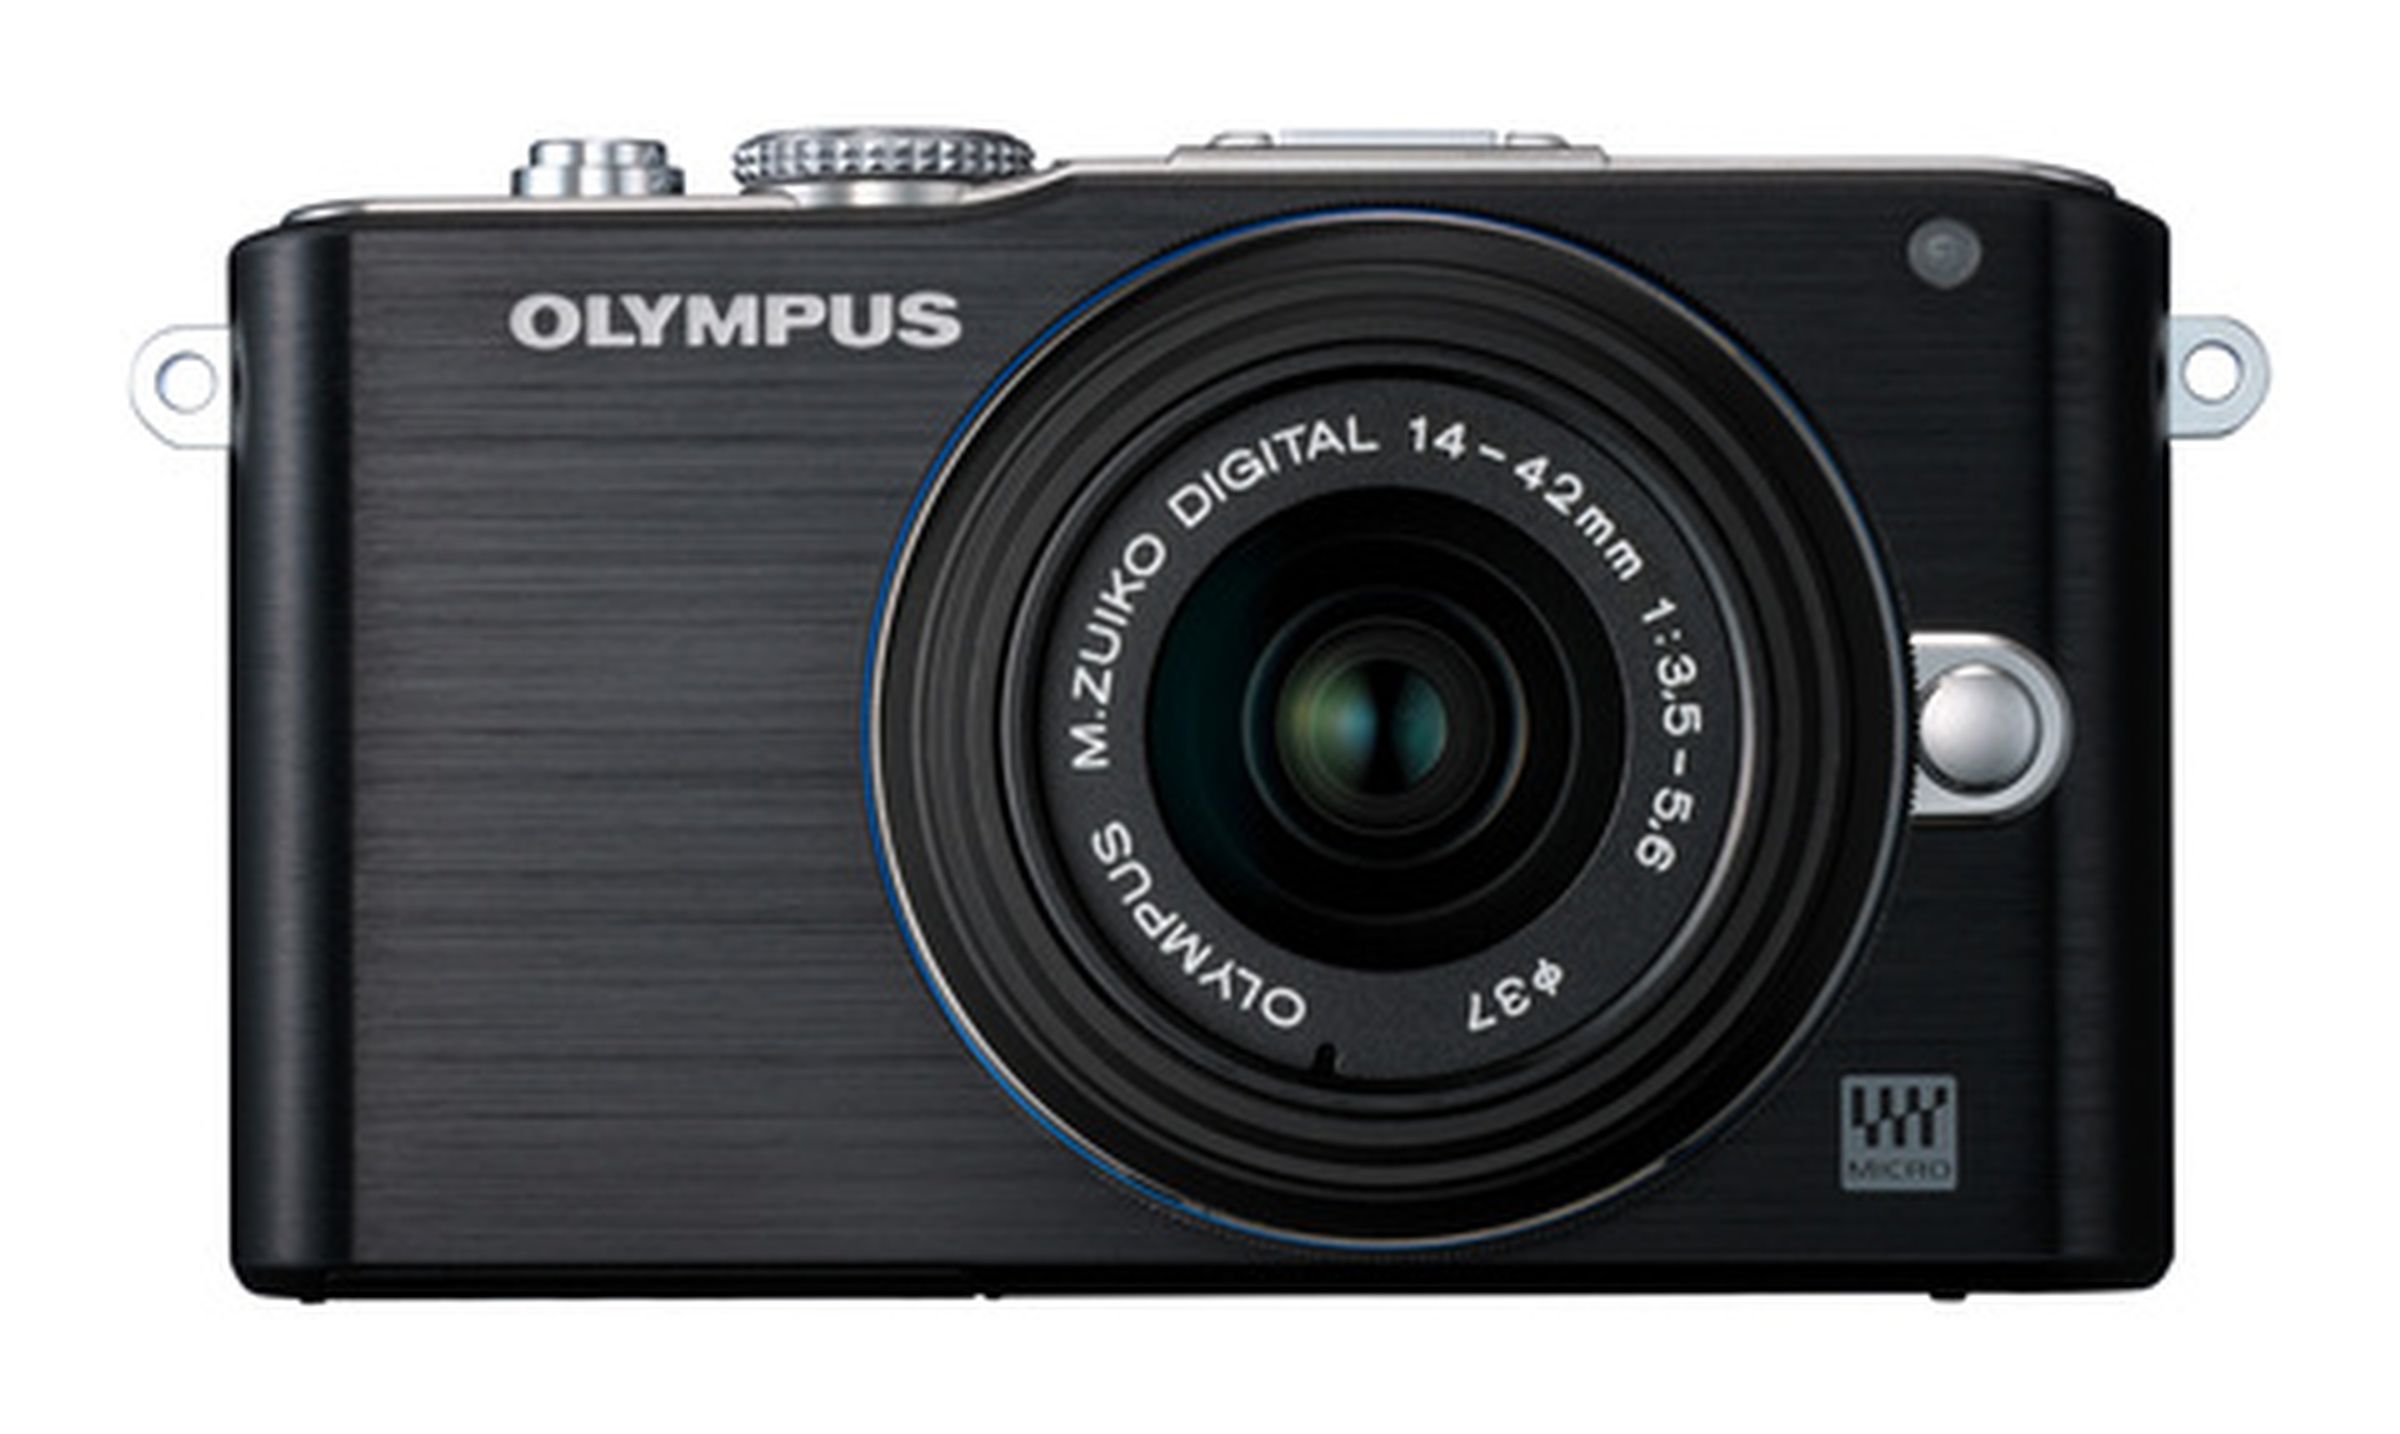 Olympus E-P3, E-PL3, and E-PM1 pictures